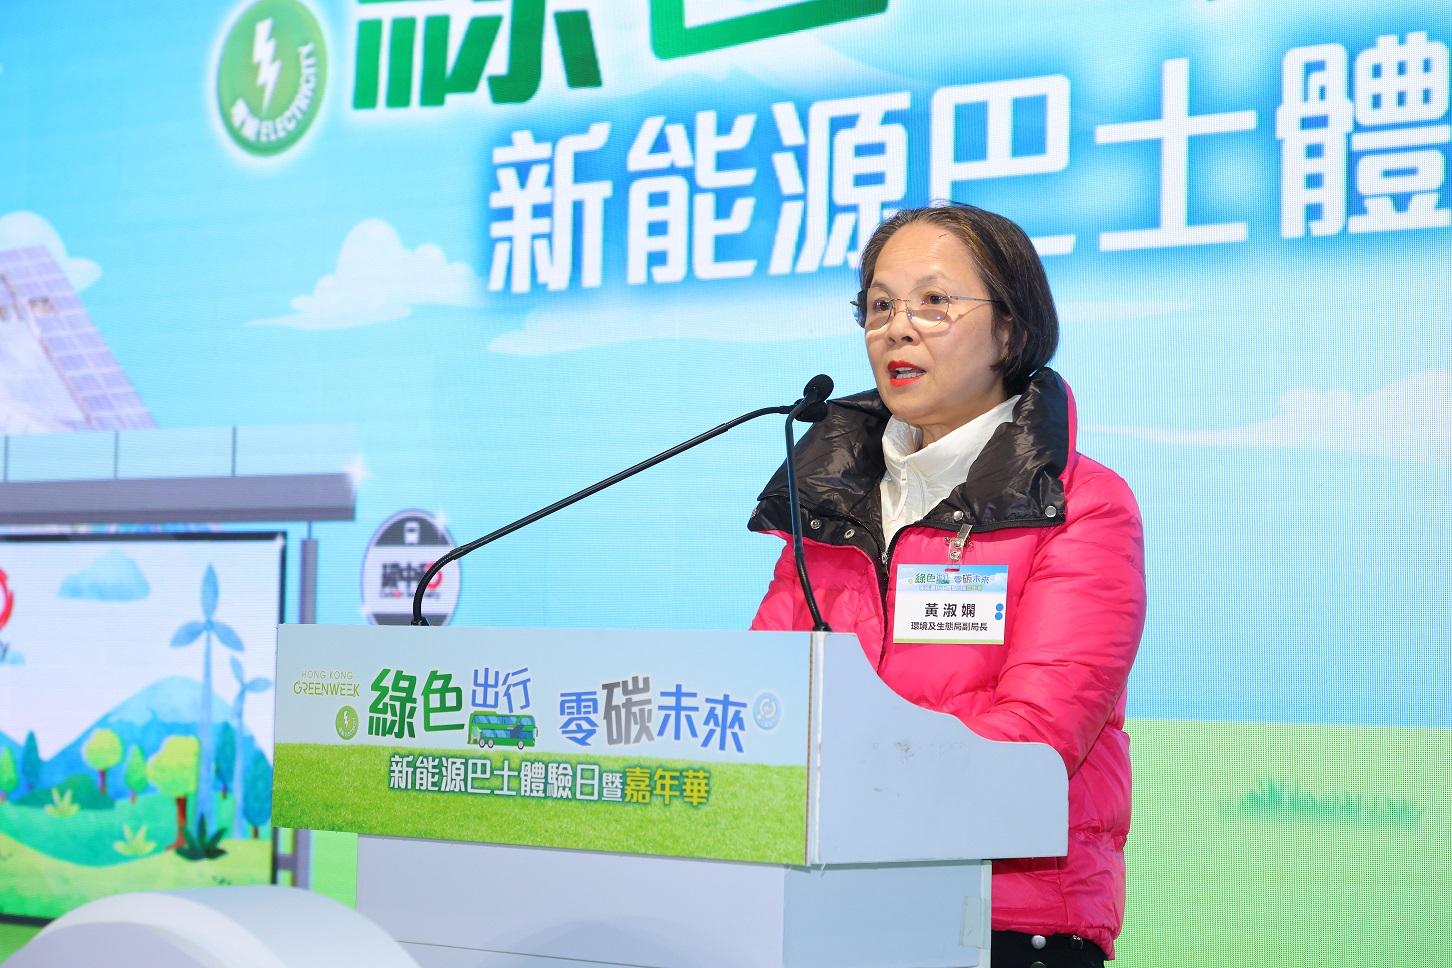 The "Green Travel for a Zero Carbon Future" - New Energy Bus Experience Day and Carnival was held at CIC-Zero Carbon Park today (March 2). Photo shows the Under Secretary for Environment and Ecology, Miss Diane Wong, delivering a speech at the opening ceremony.